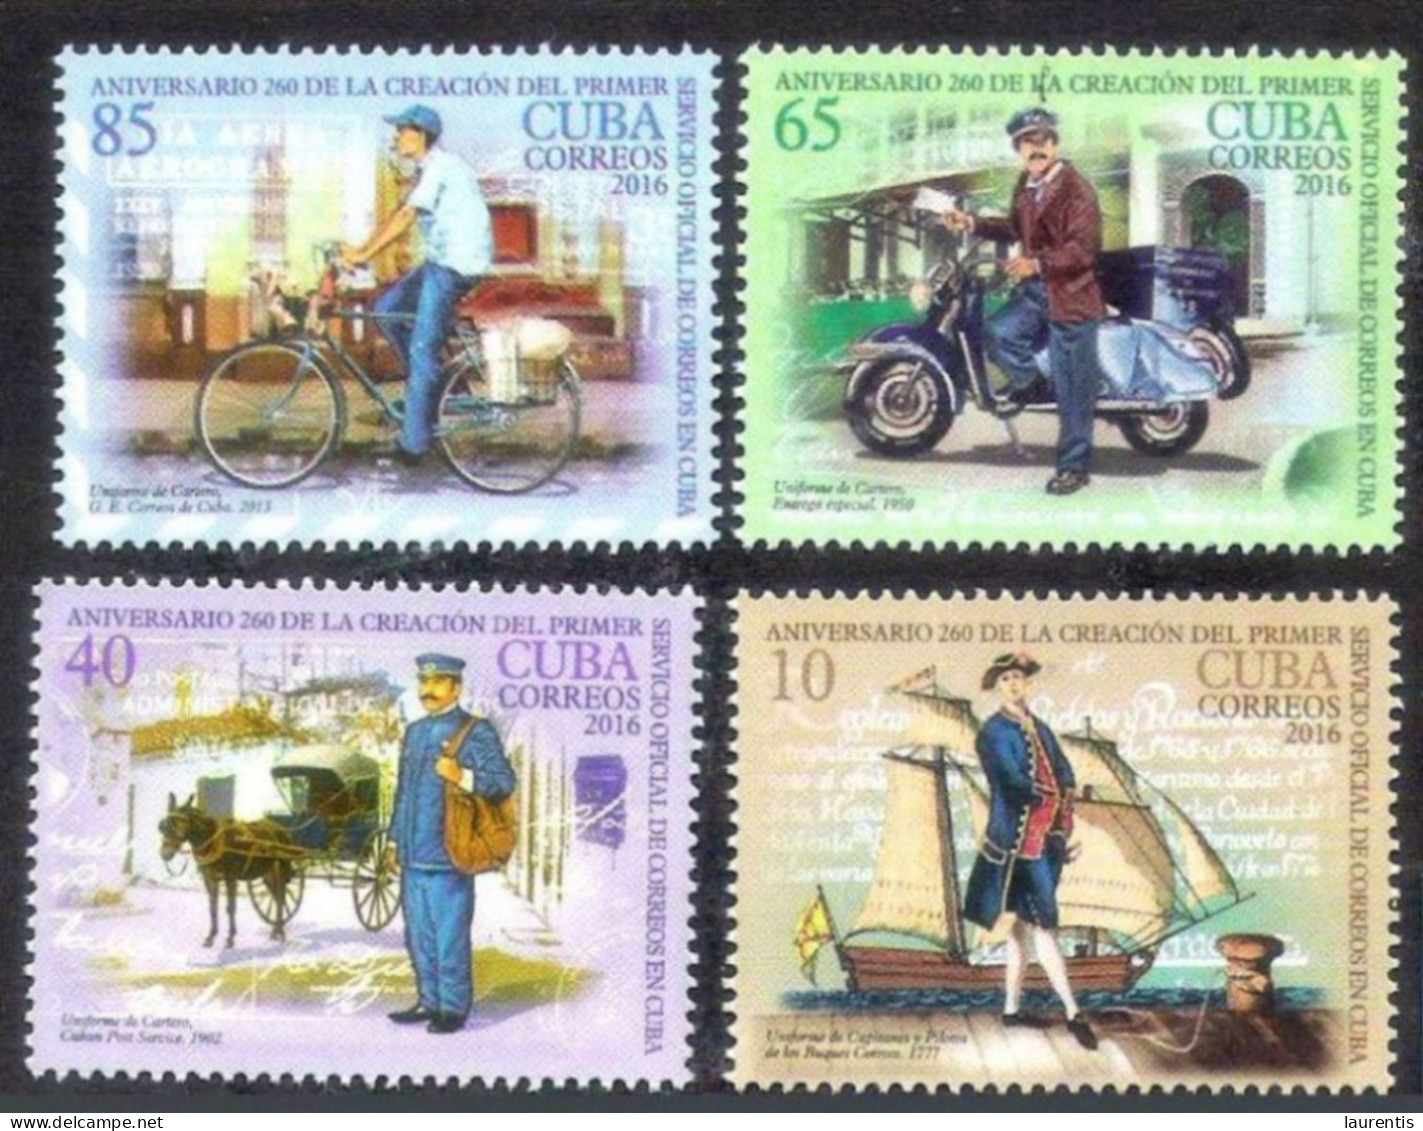 629  Motorcycles -  Bycicles - Coaches -  Mailmen - 2016  MNH - Cb - 1,95 - Motorbikes